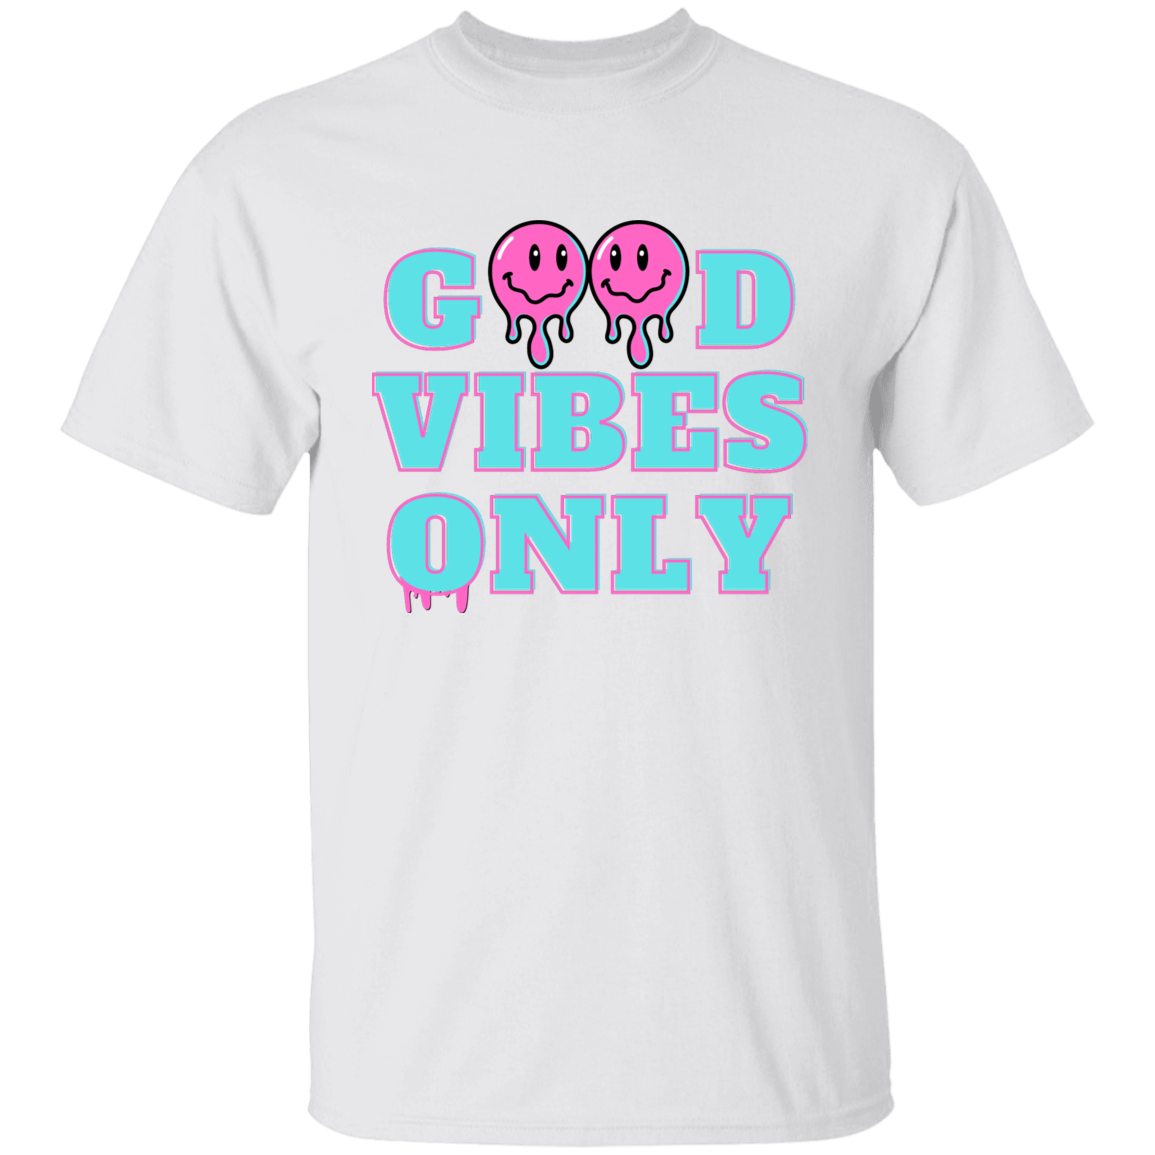 Good Vibes Only - Boy's, Teen, Youth T-Shirt